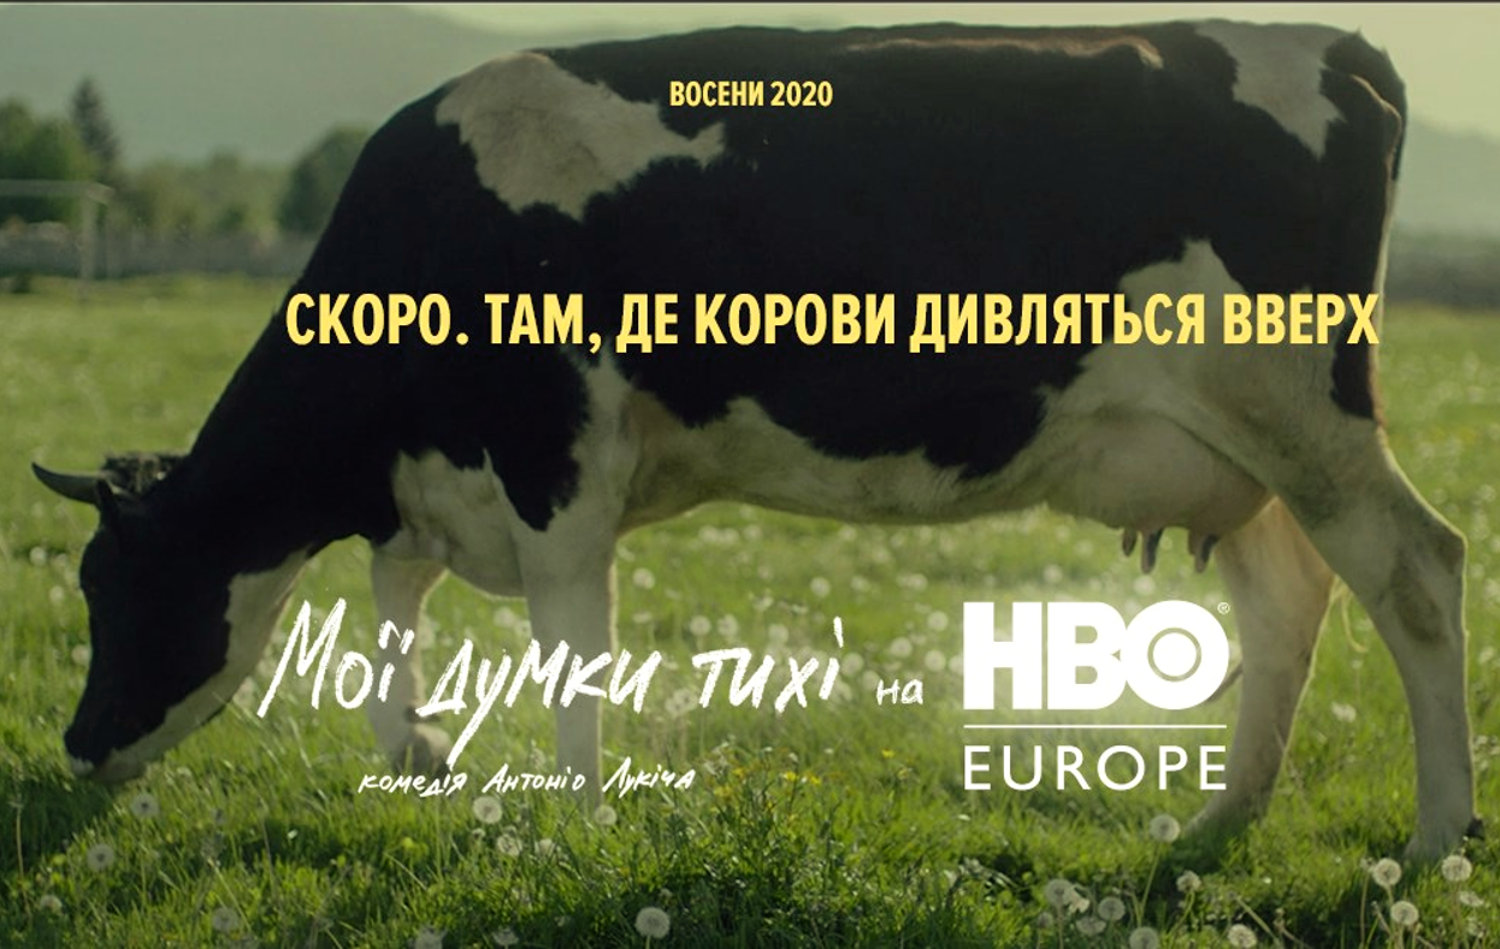 Ukrainian comedy "My Thoughts are Silent" to be aired on HBO this fall 2